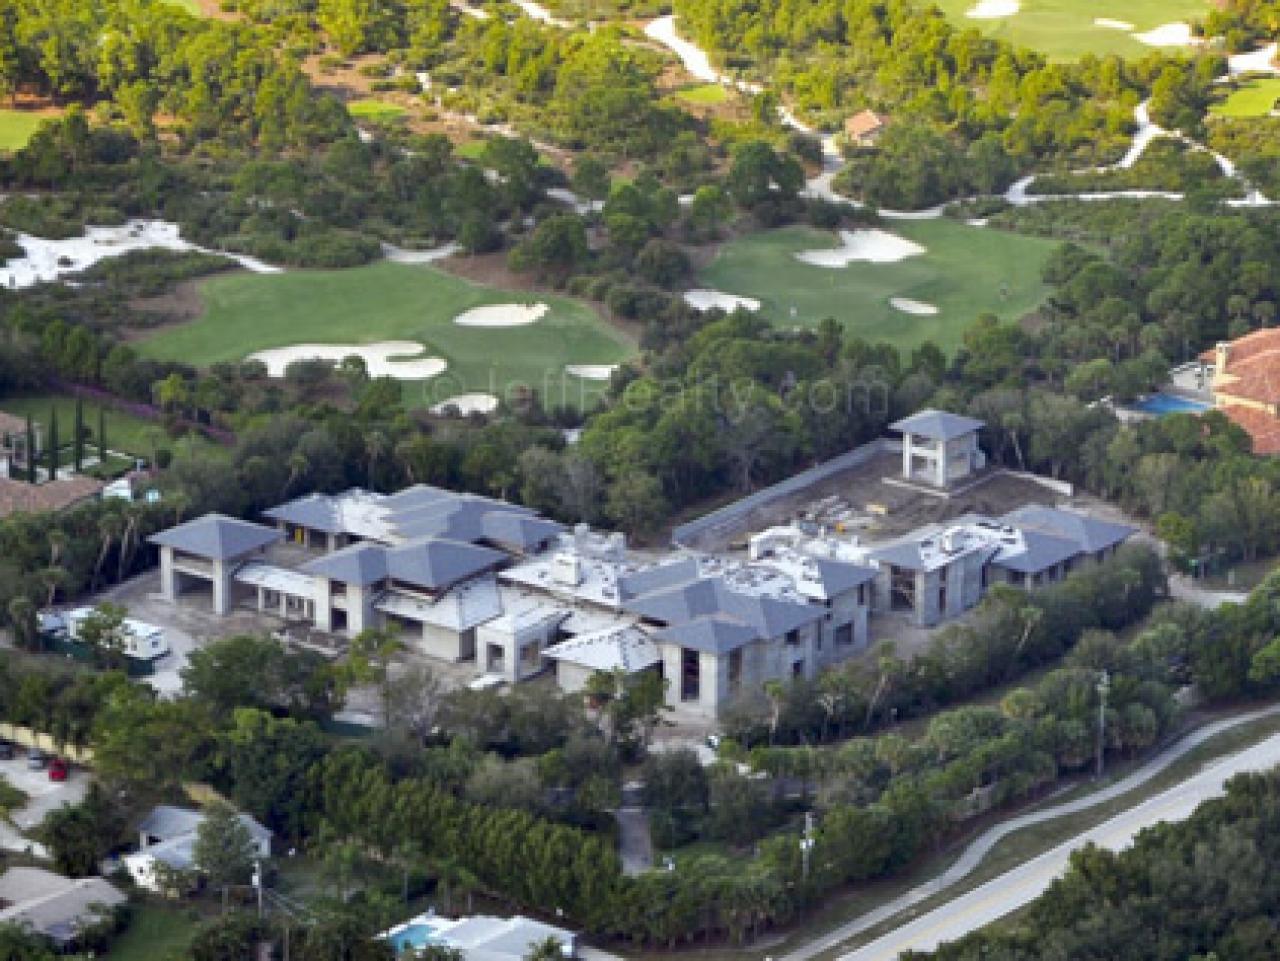 Photo: Michael Jordan's new golf course home | This is the Loop